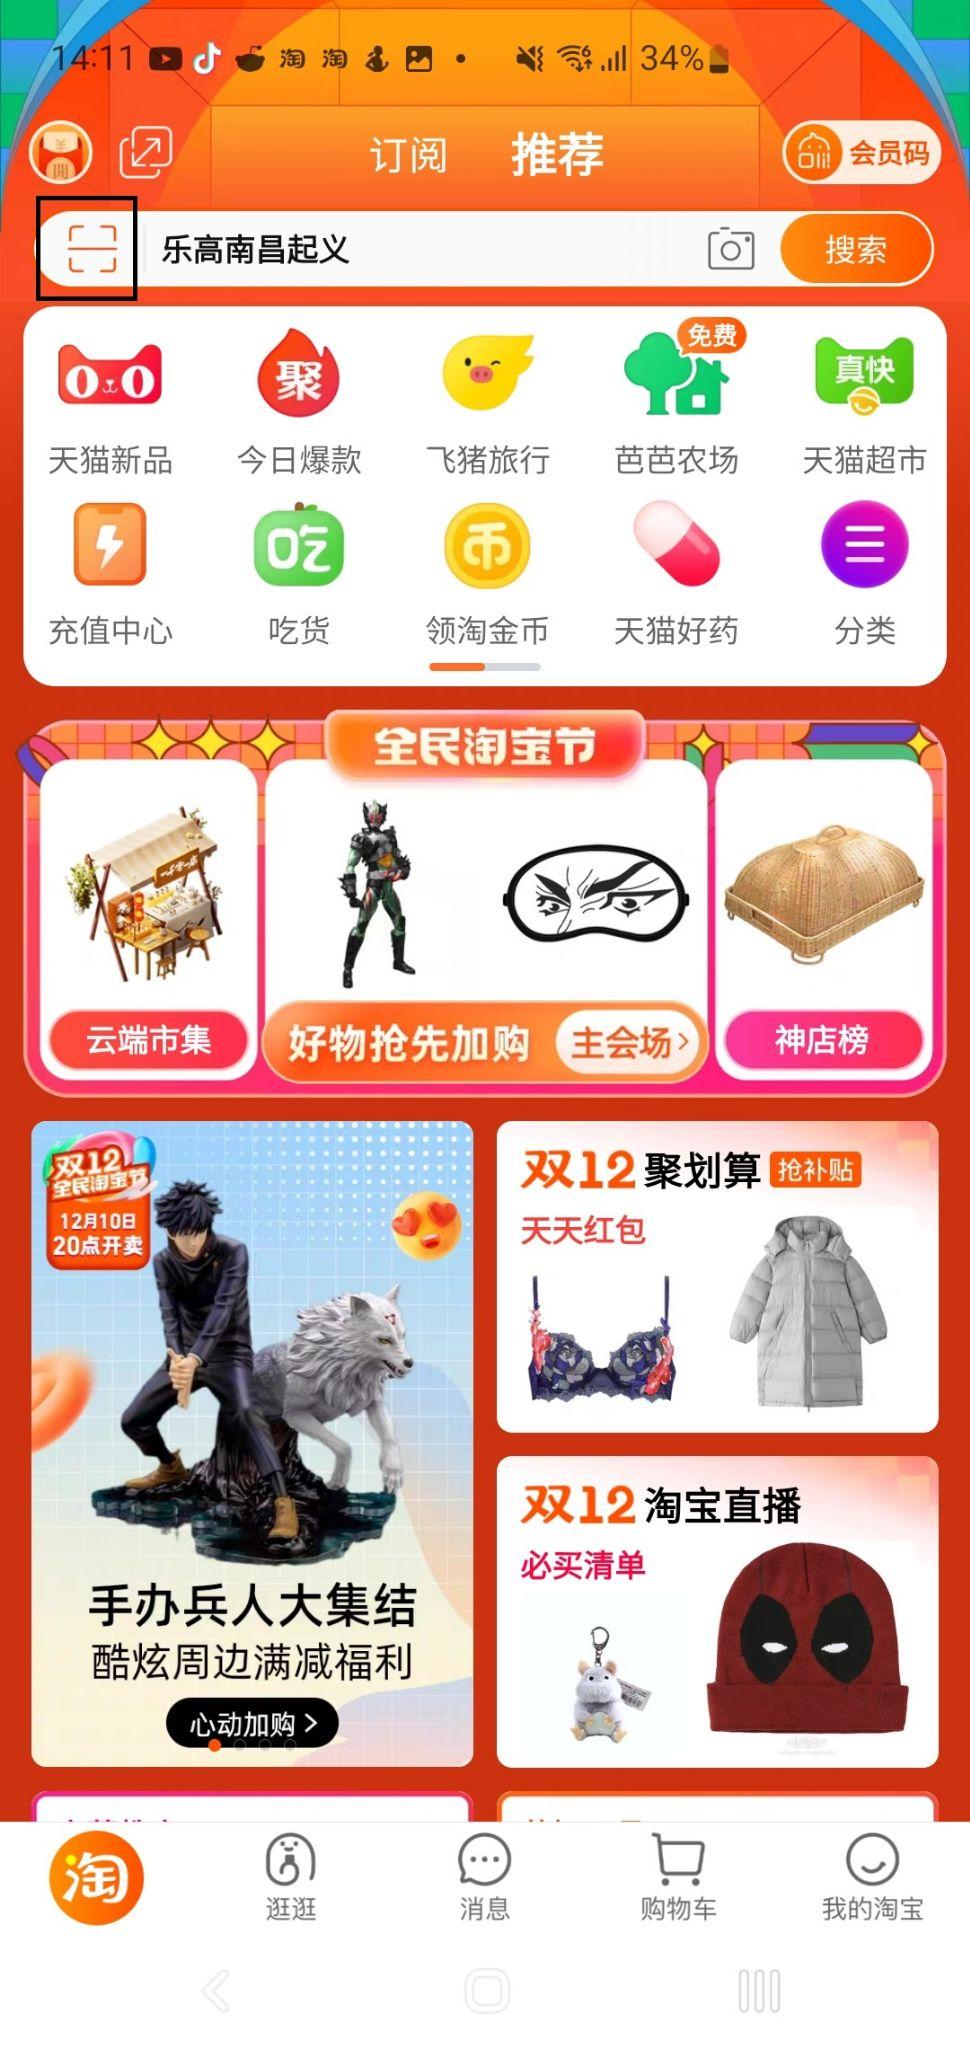 Scan with 扫一扫 on Taobao App